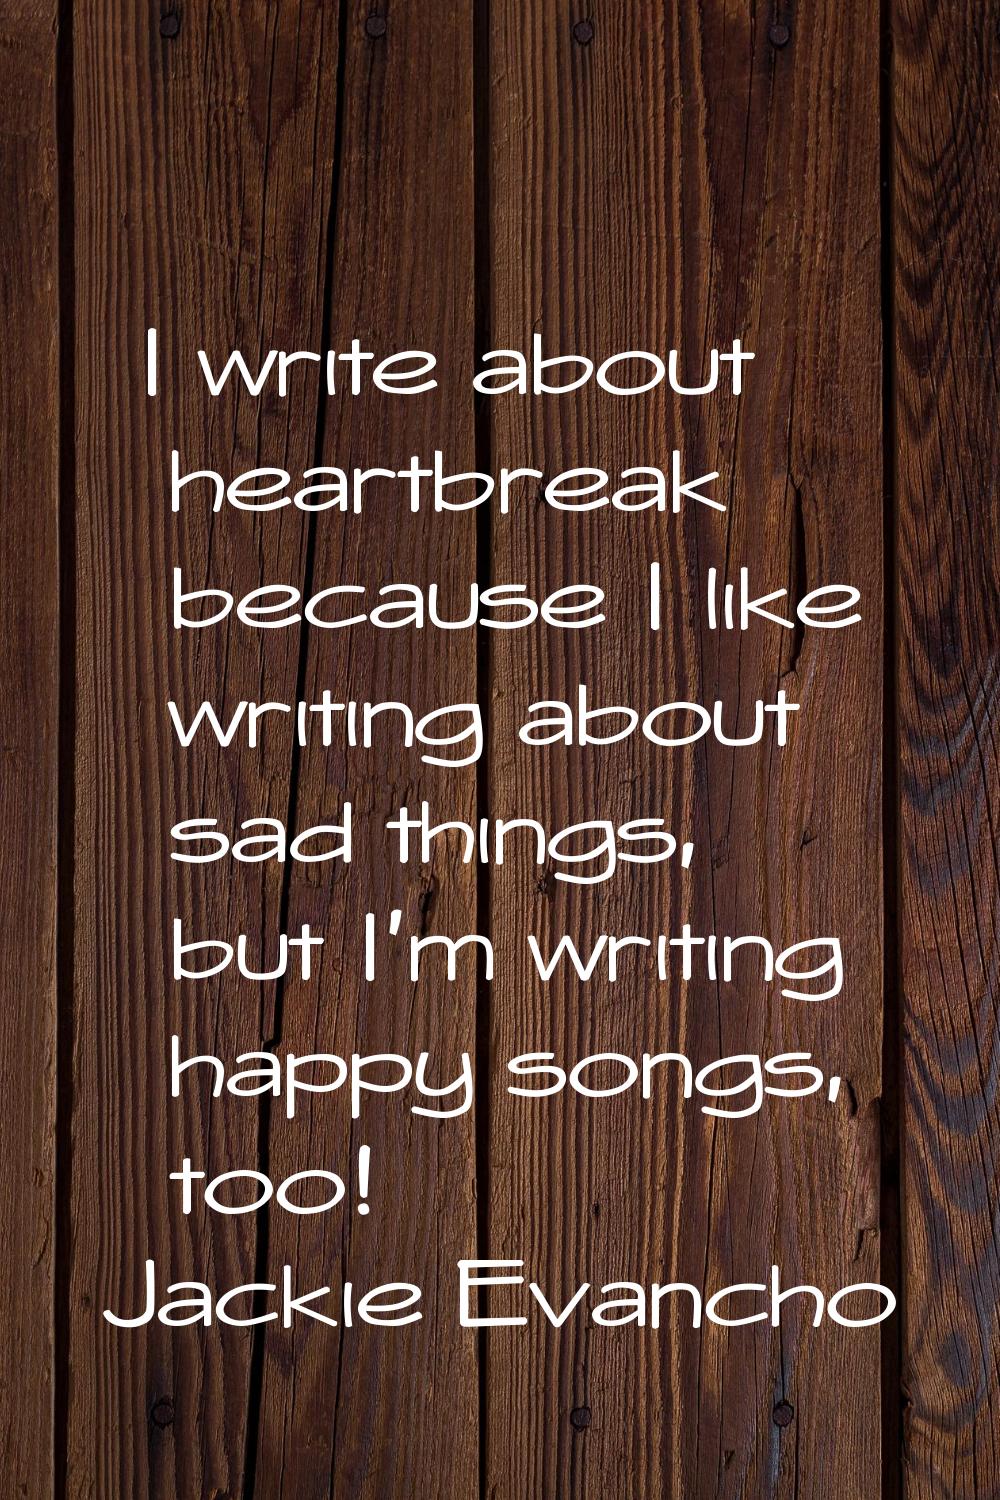 I write about heartbreak because I like writing about sad things, but I'm writing happy songs, too!